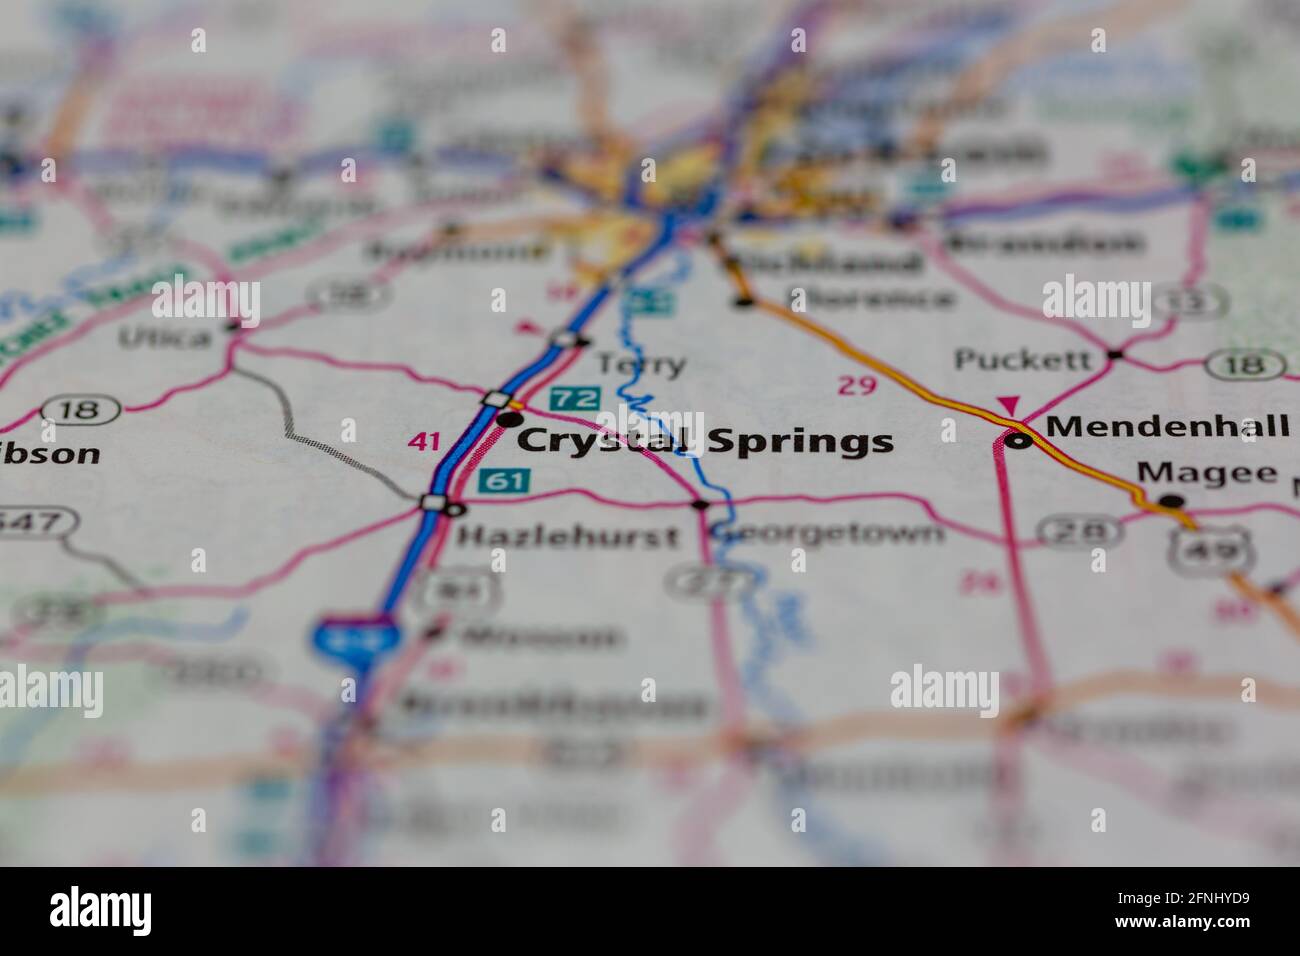 Crystal springs Mississippi USA shown on a Geography map or road map Stock Photo